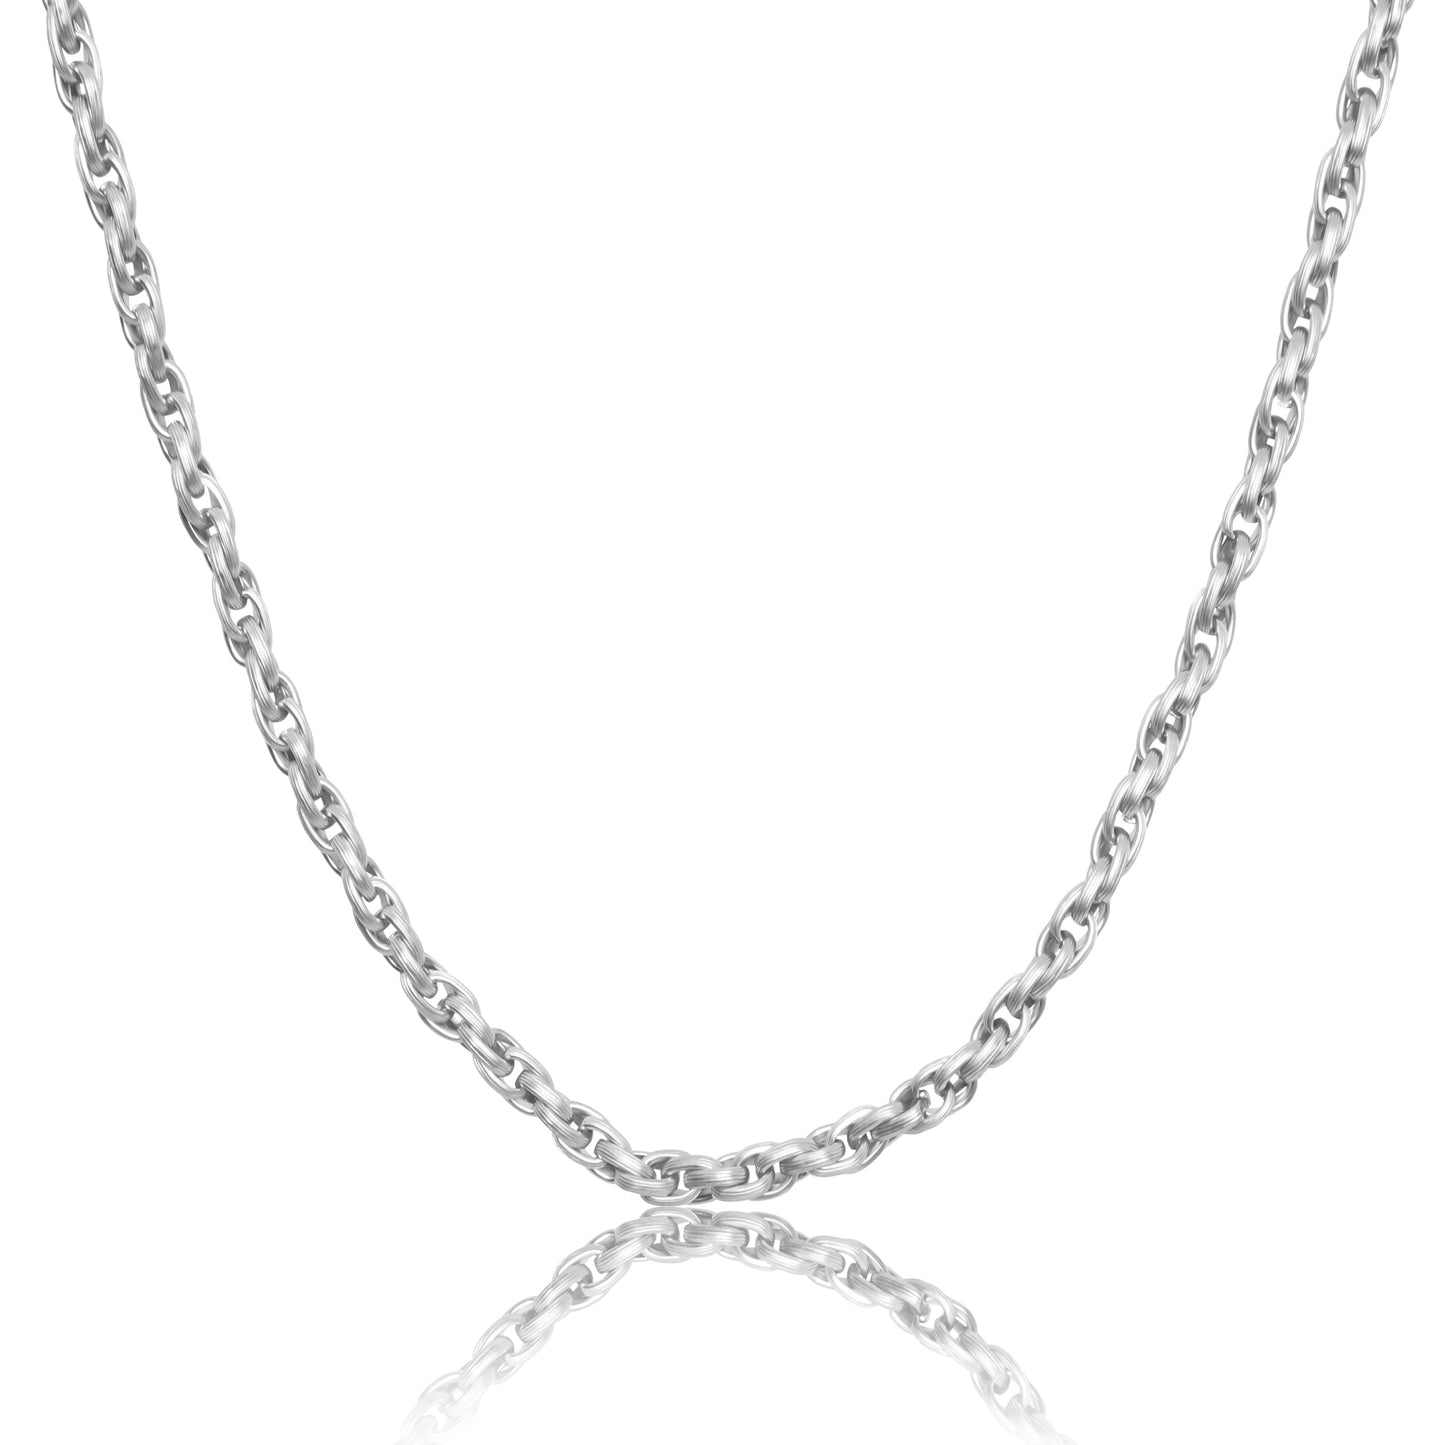 Thick Rope Chain 6mm - Silver